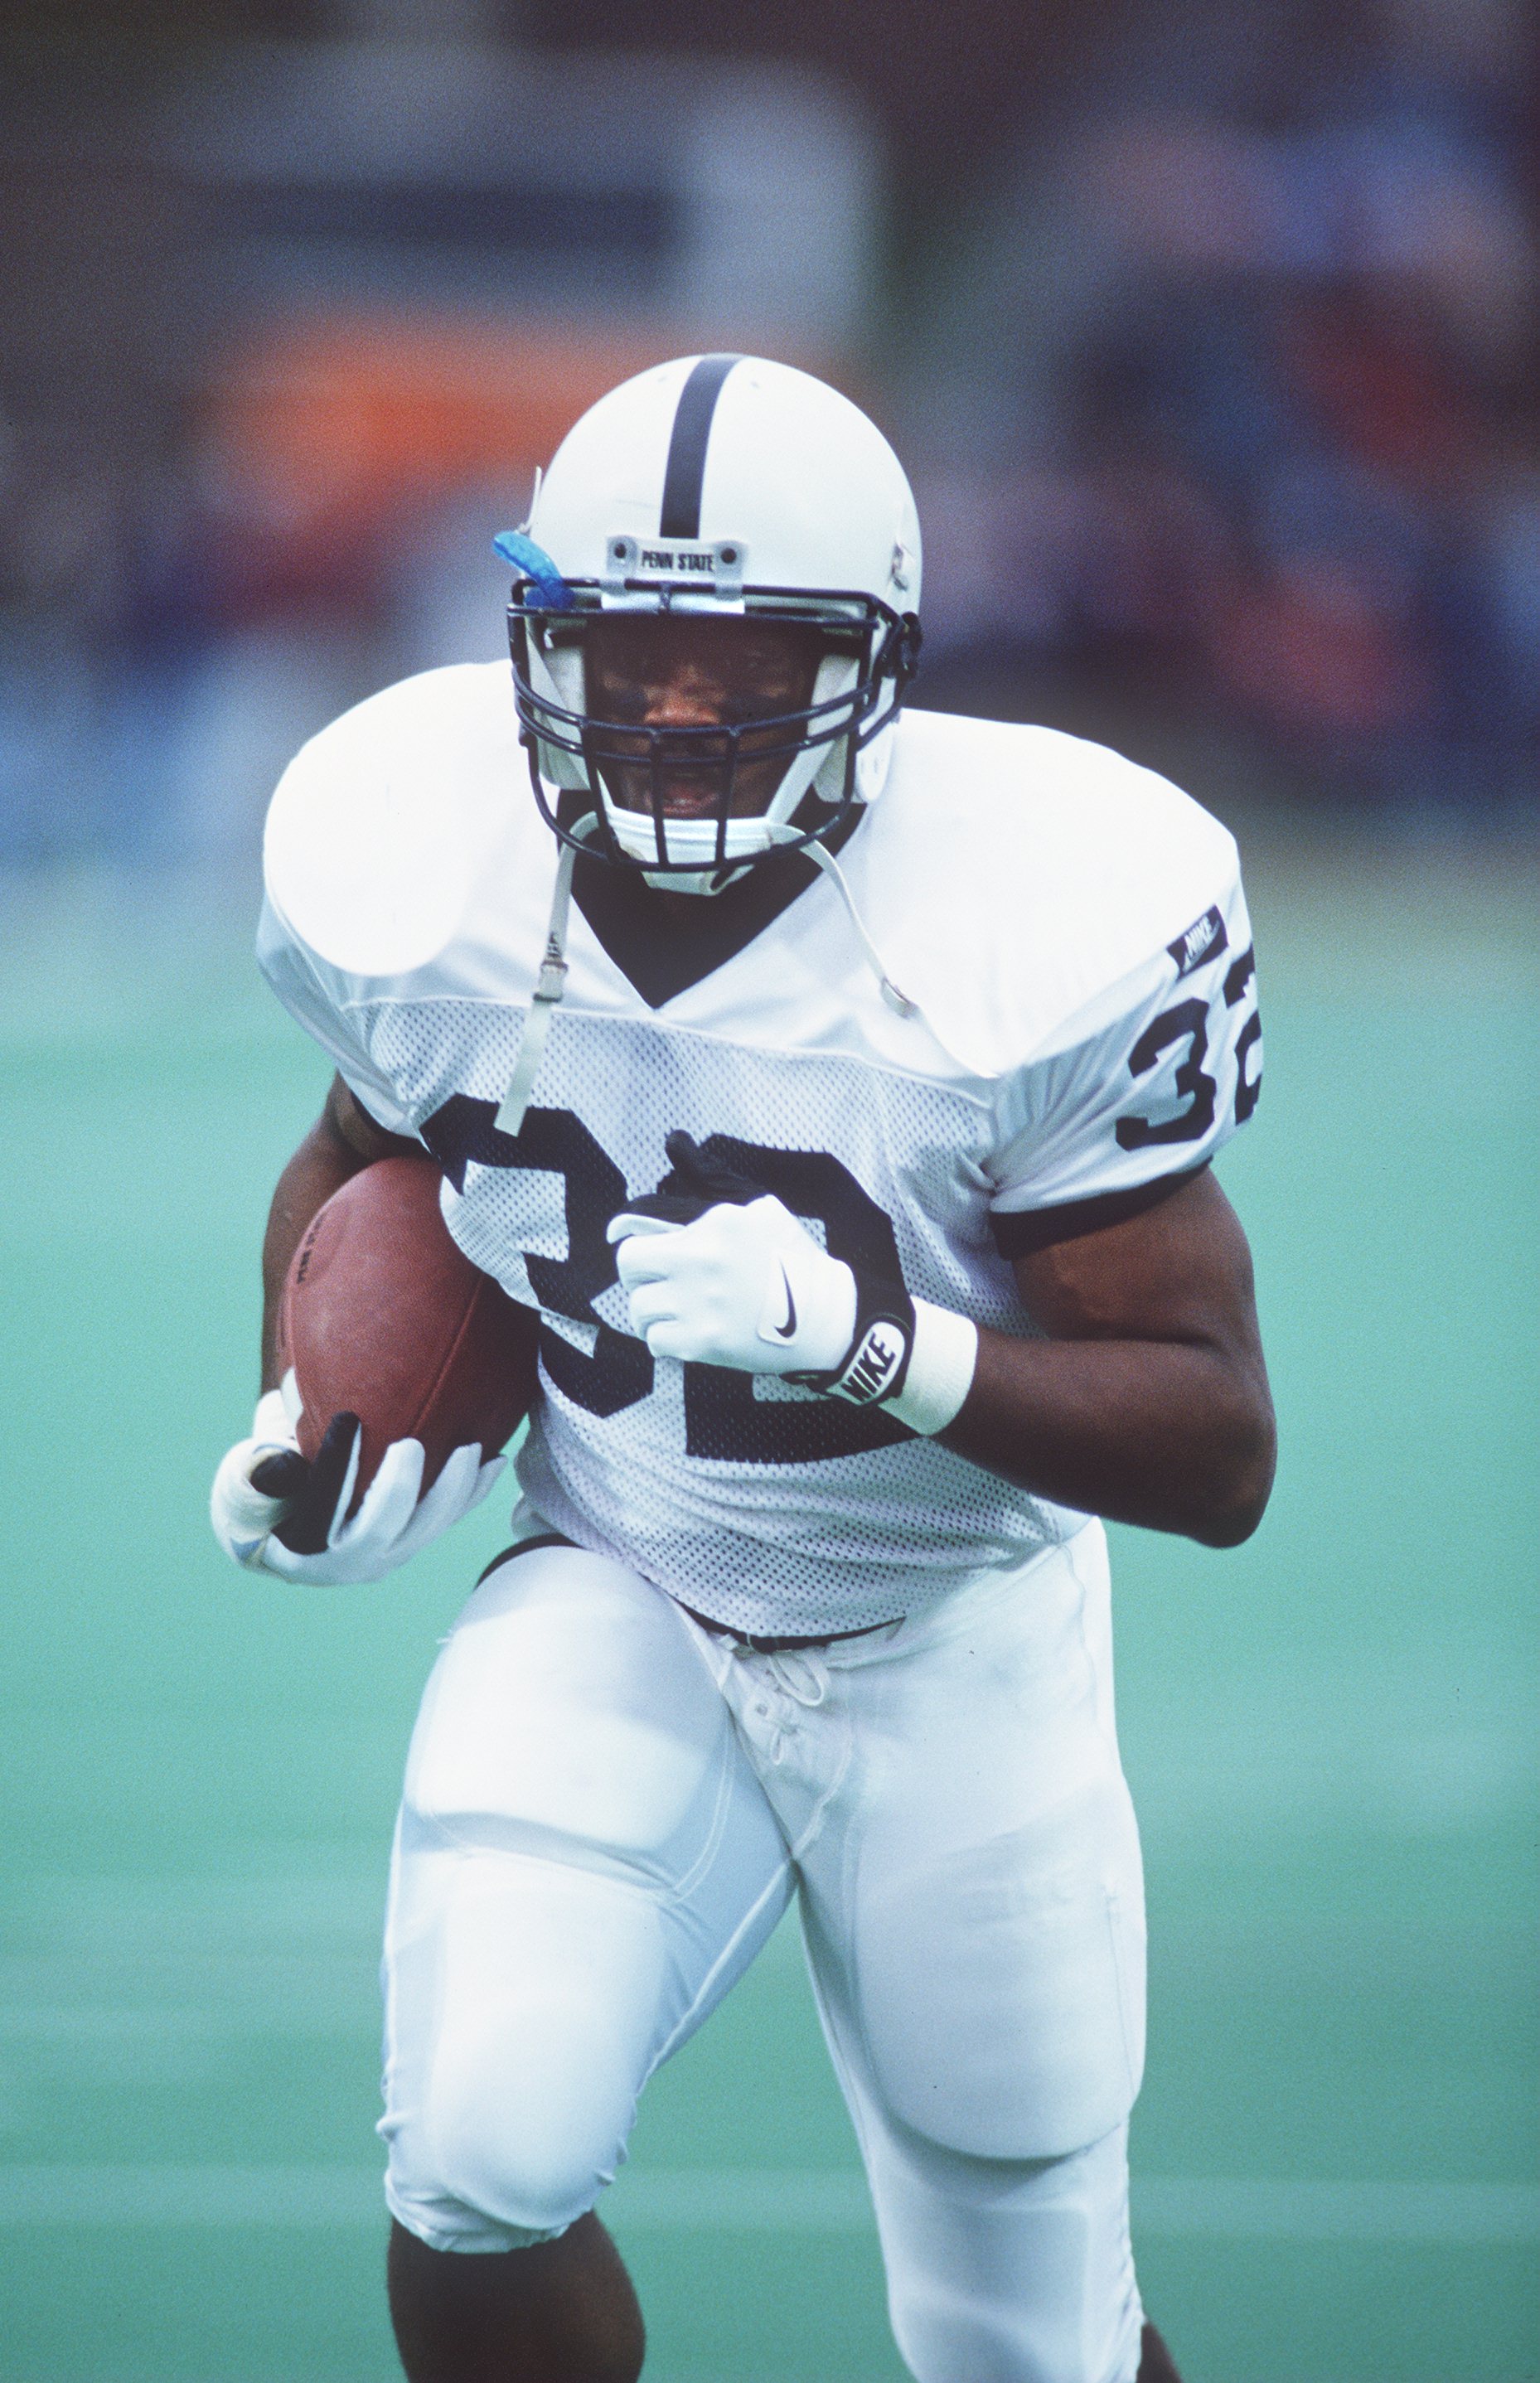 12 Nov 1994: PENN STATE RUNNING BACK KI-JANA CARTER CARRIES THE FOOTBALL DURING THE NITTANY LIONS 35-31 VICTORY OVER THE ILLINOIS FIGHTING ILLINI AT MEMORIAL STADIUM IN CHAMPAIGN, ILLINOIS.